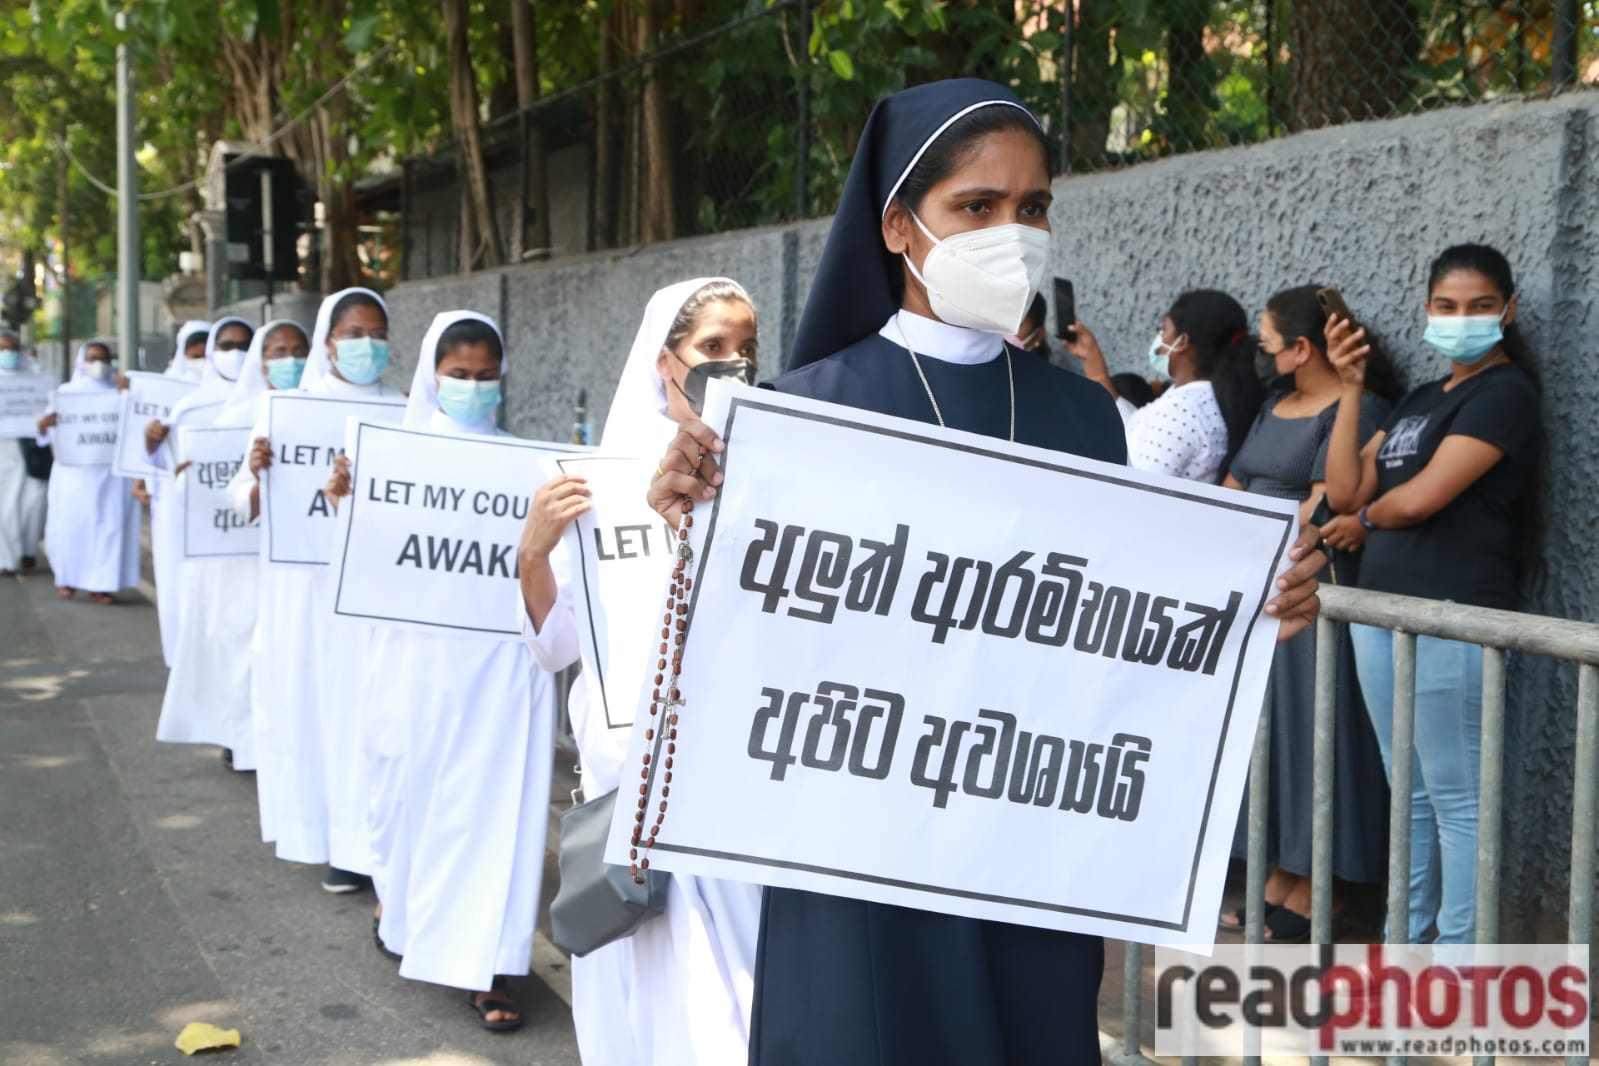 Protests against government at Archbishops residence - Read Photos